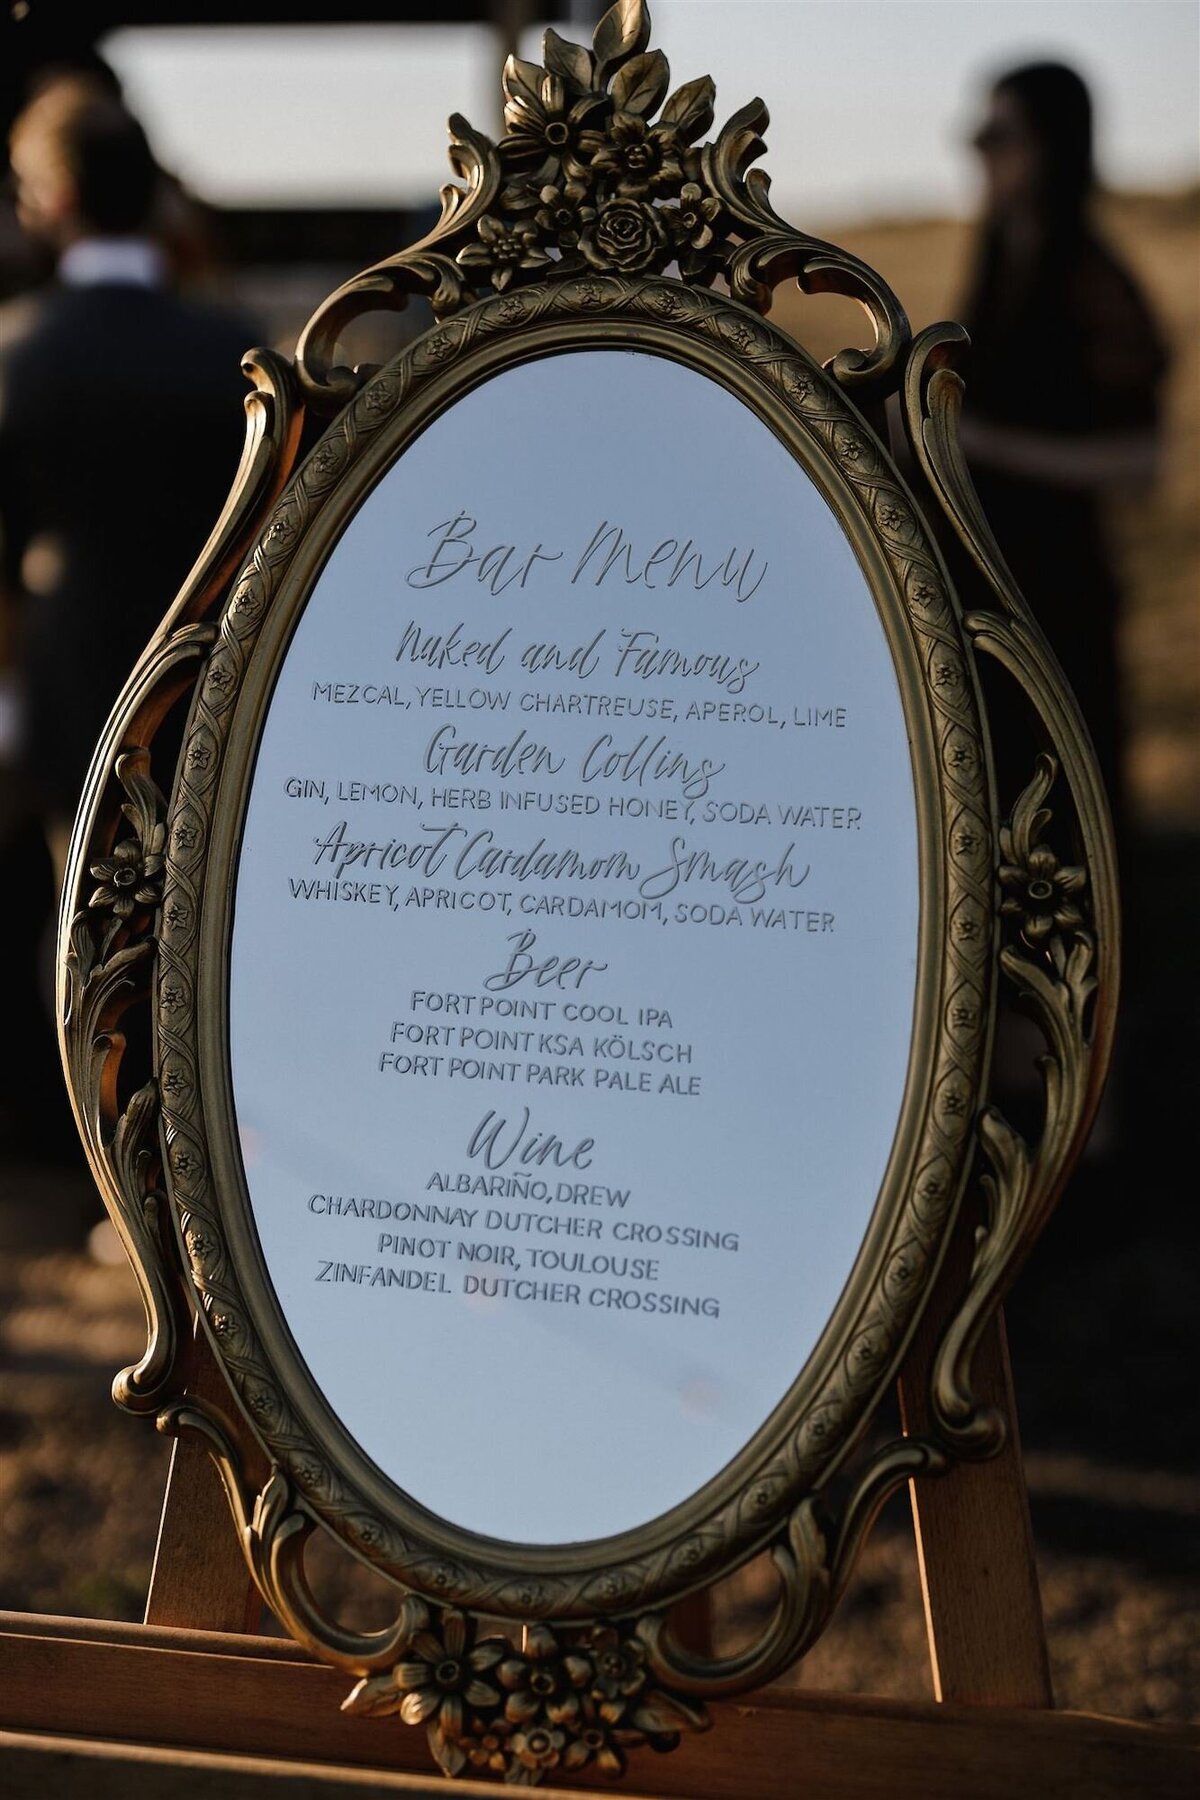 Oval mirror with floral details, available to rent in the Bay Area for weddings